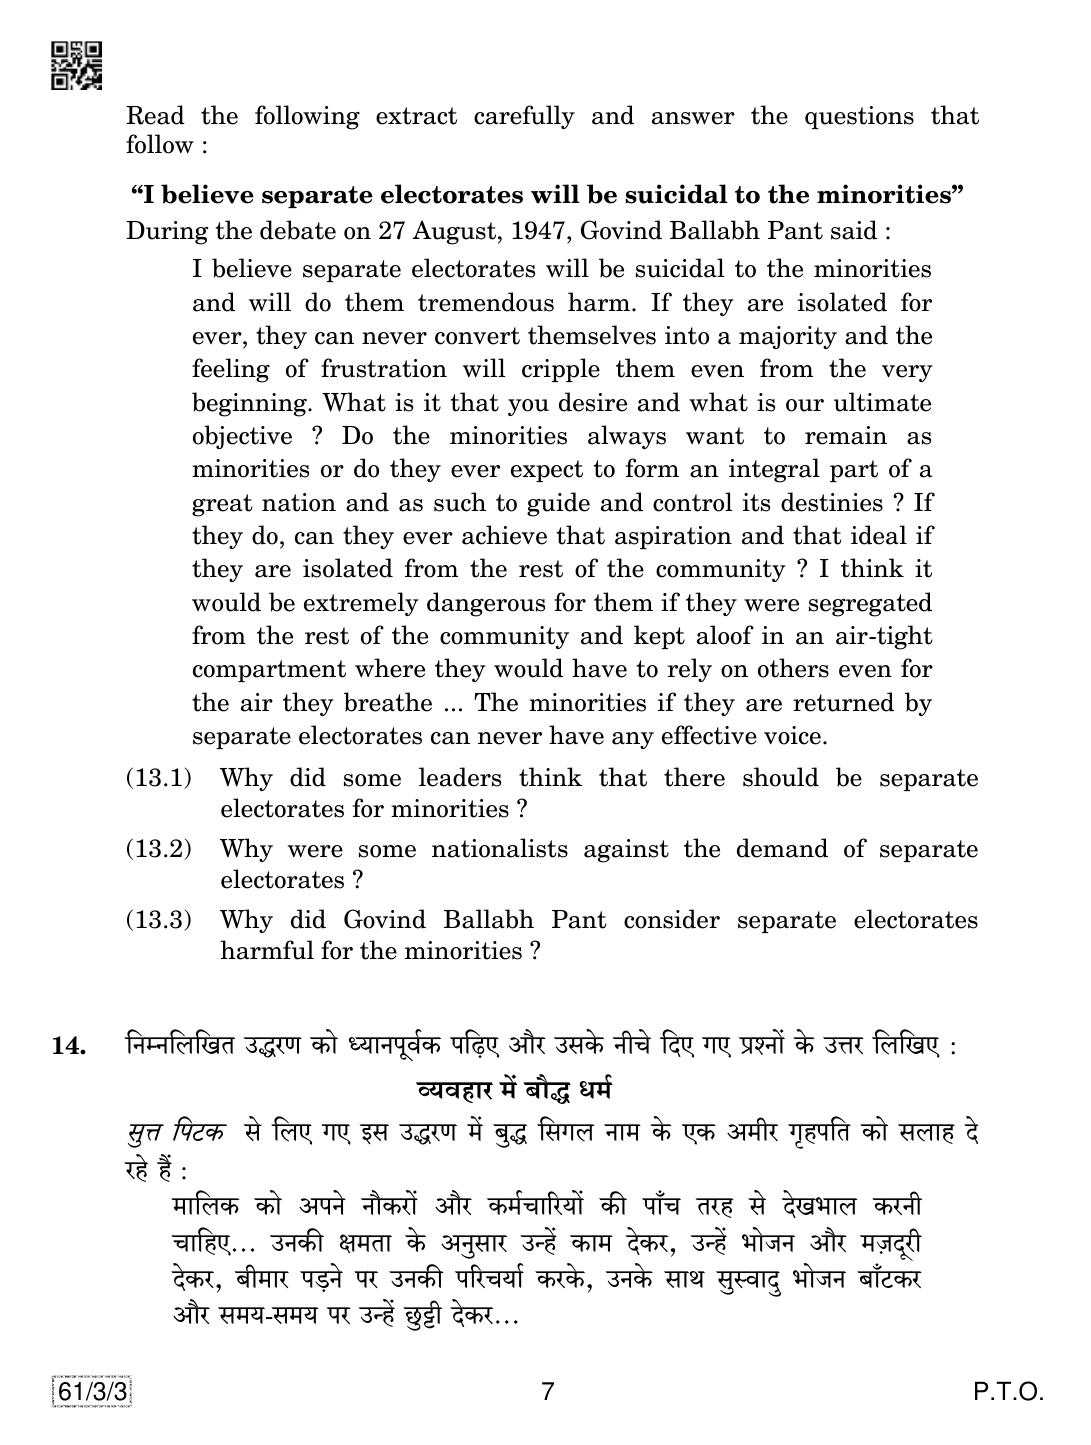 CBSE Class 12 61-3-3 History 2019 Question Paper - Page 7